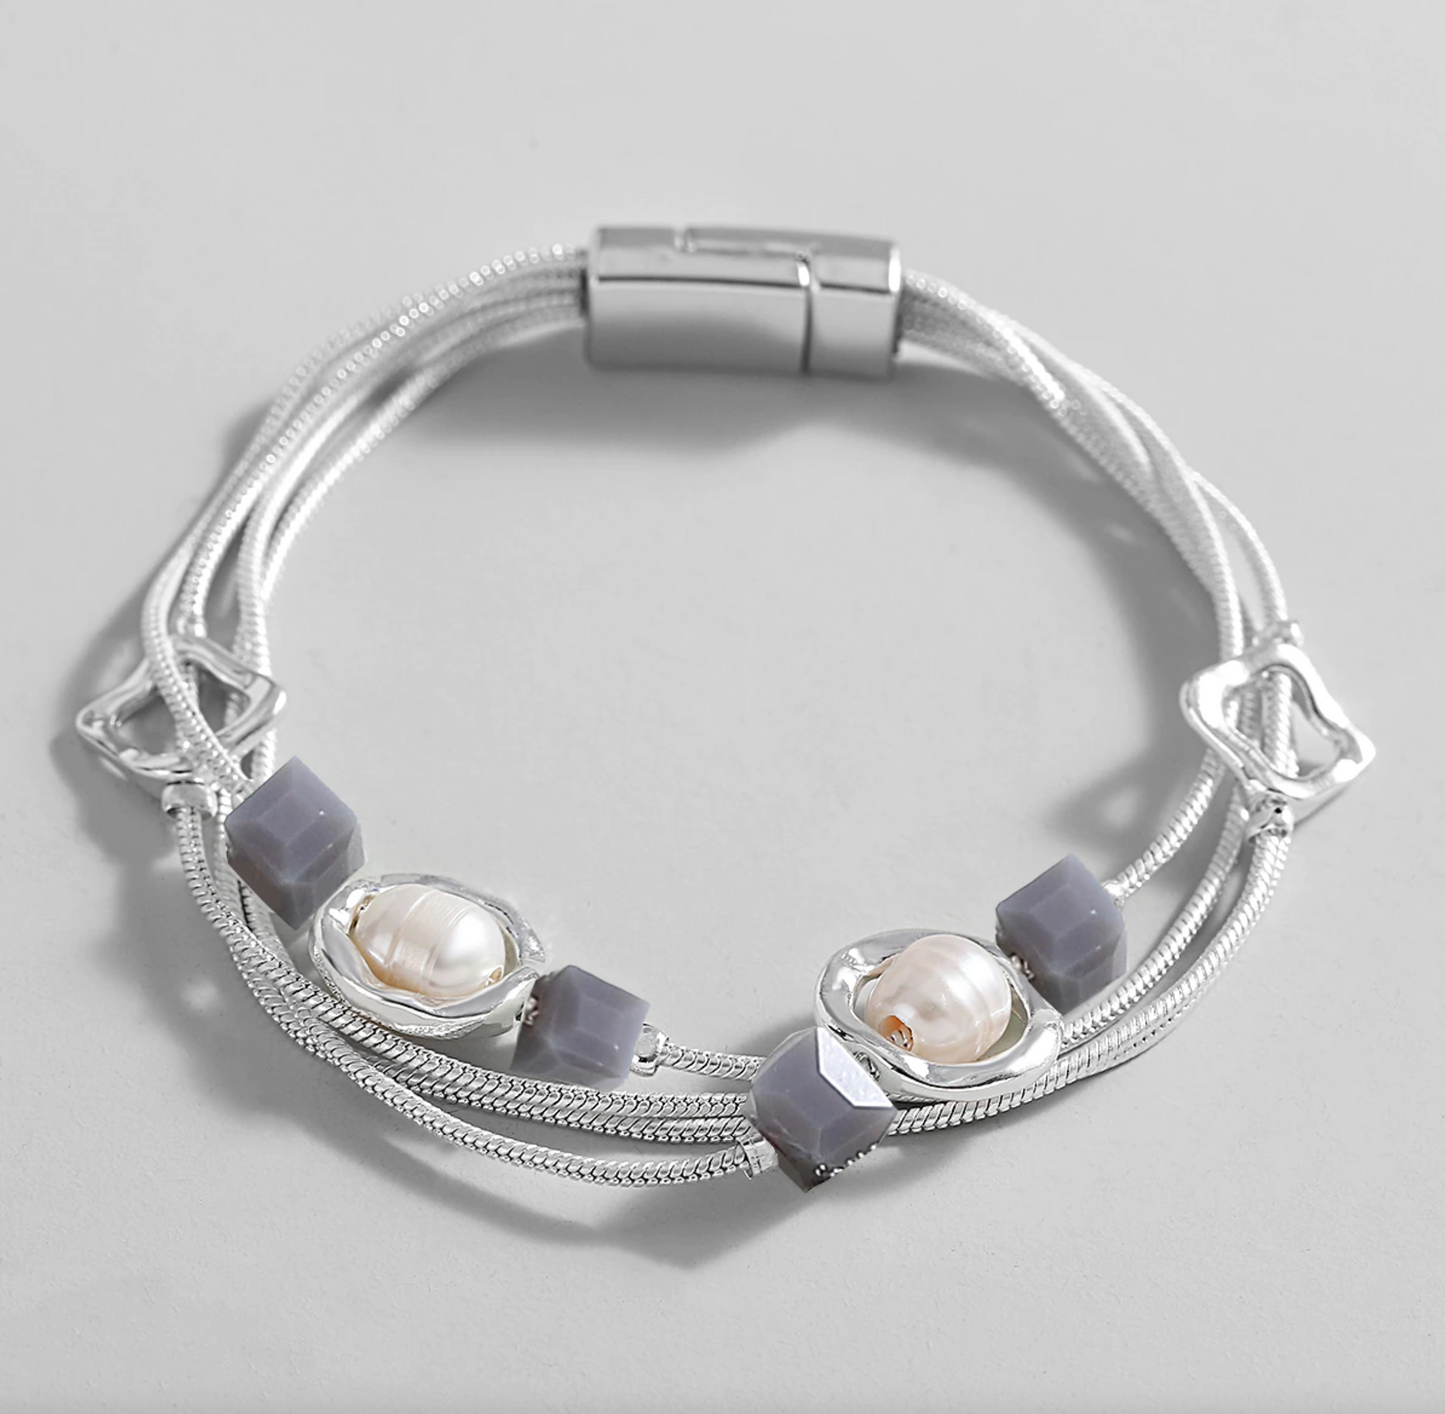 Freshwater Pearl Multi Strand Bracelet With Opal Grey Cube Accent Beads